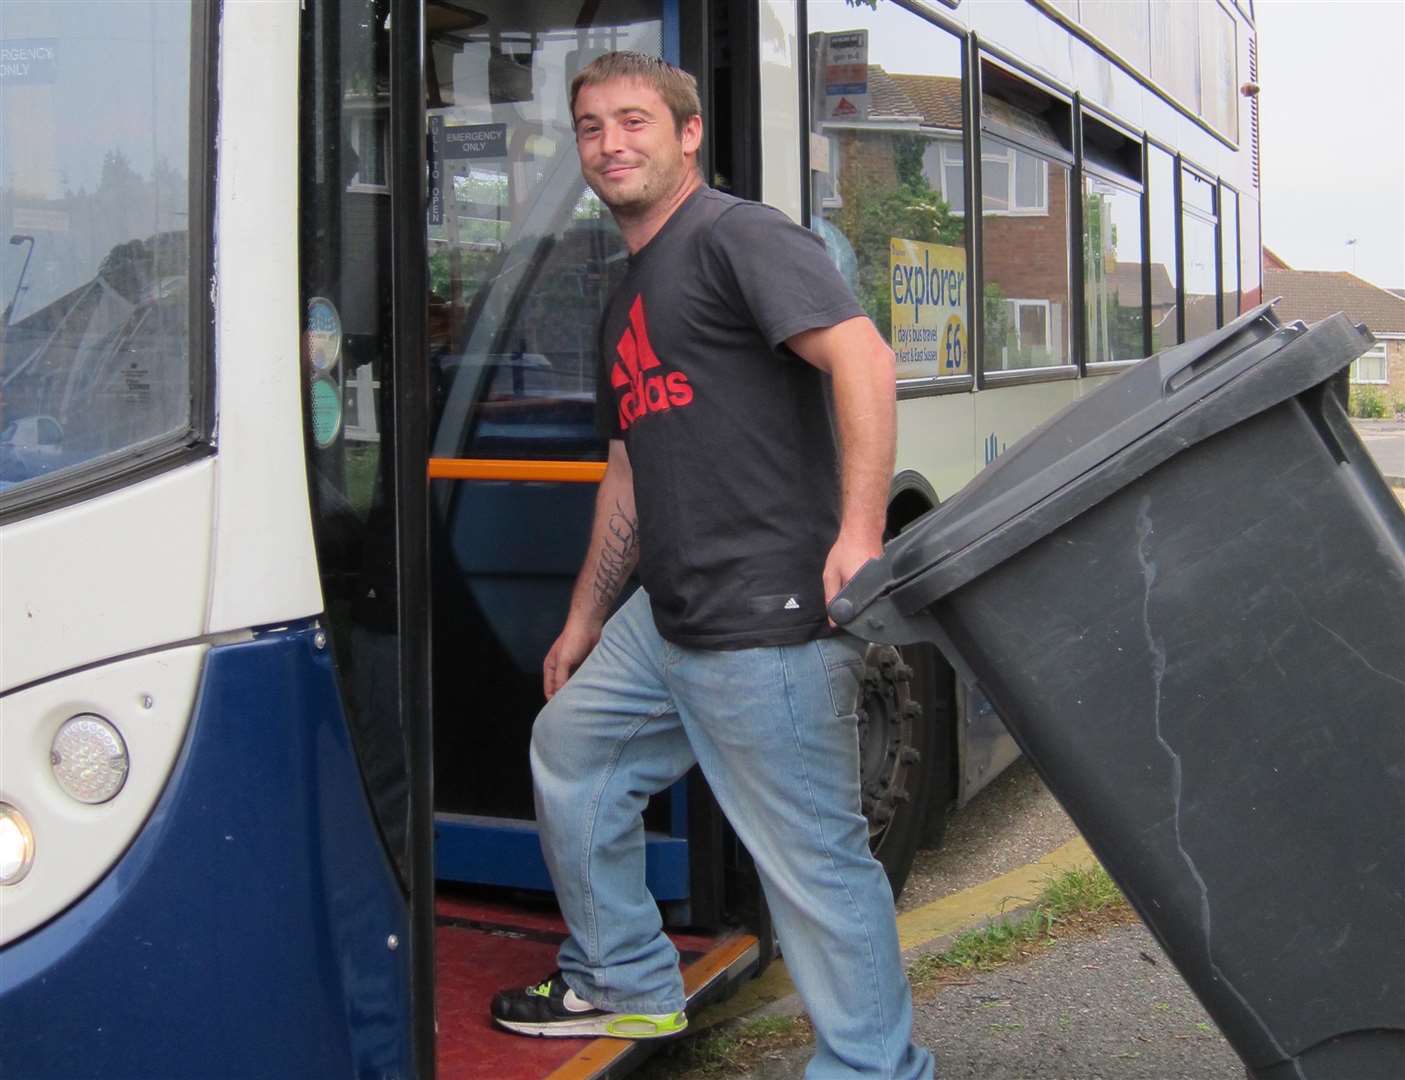 David Bridgman attempts to take his wheelie bin to the tip on the bus. Picture: Jamie Stephens